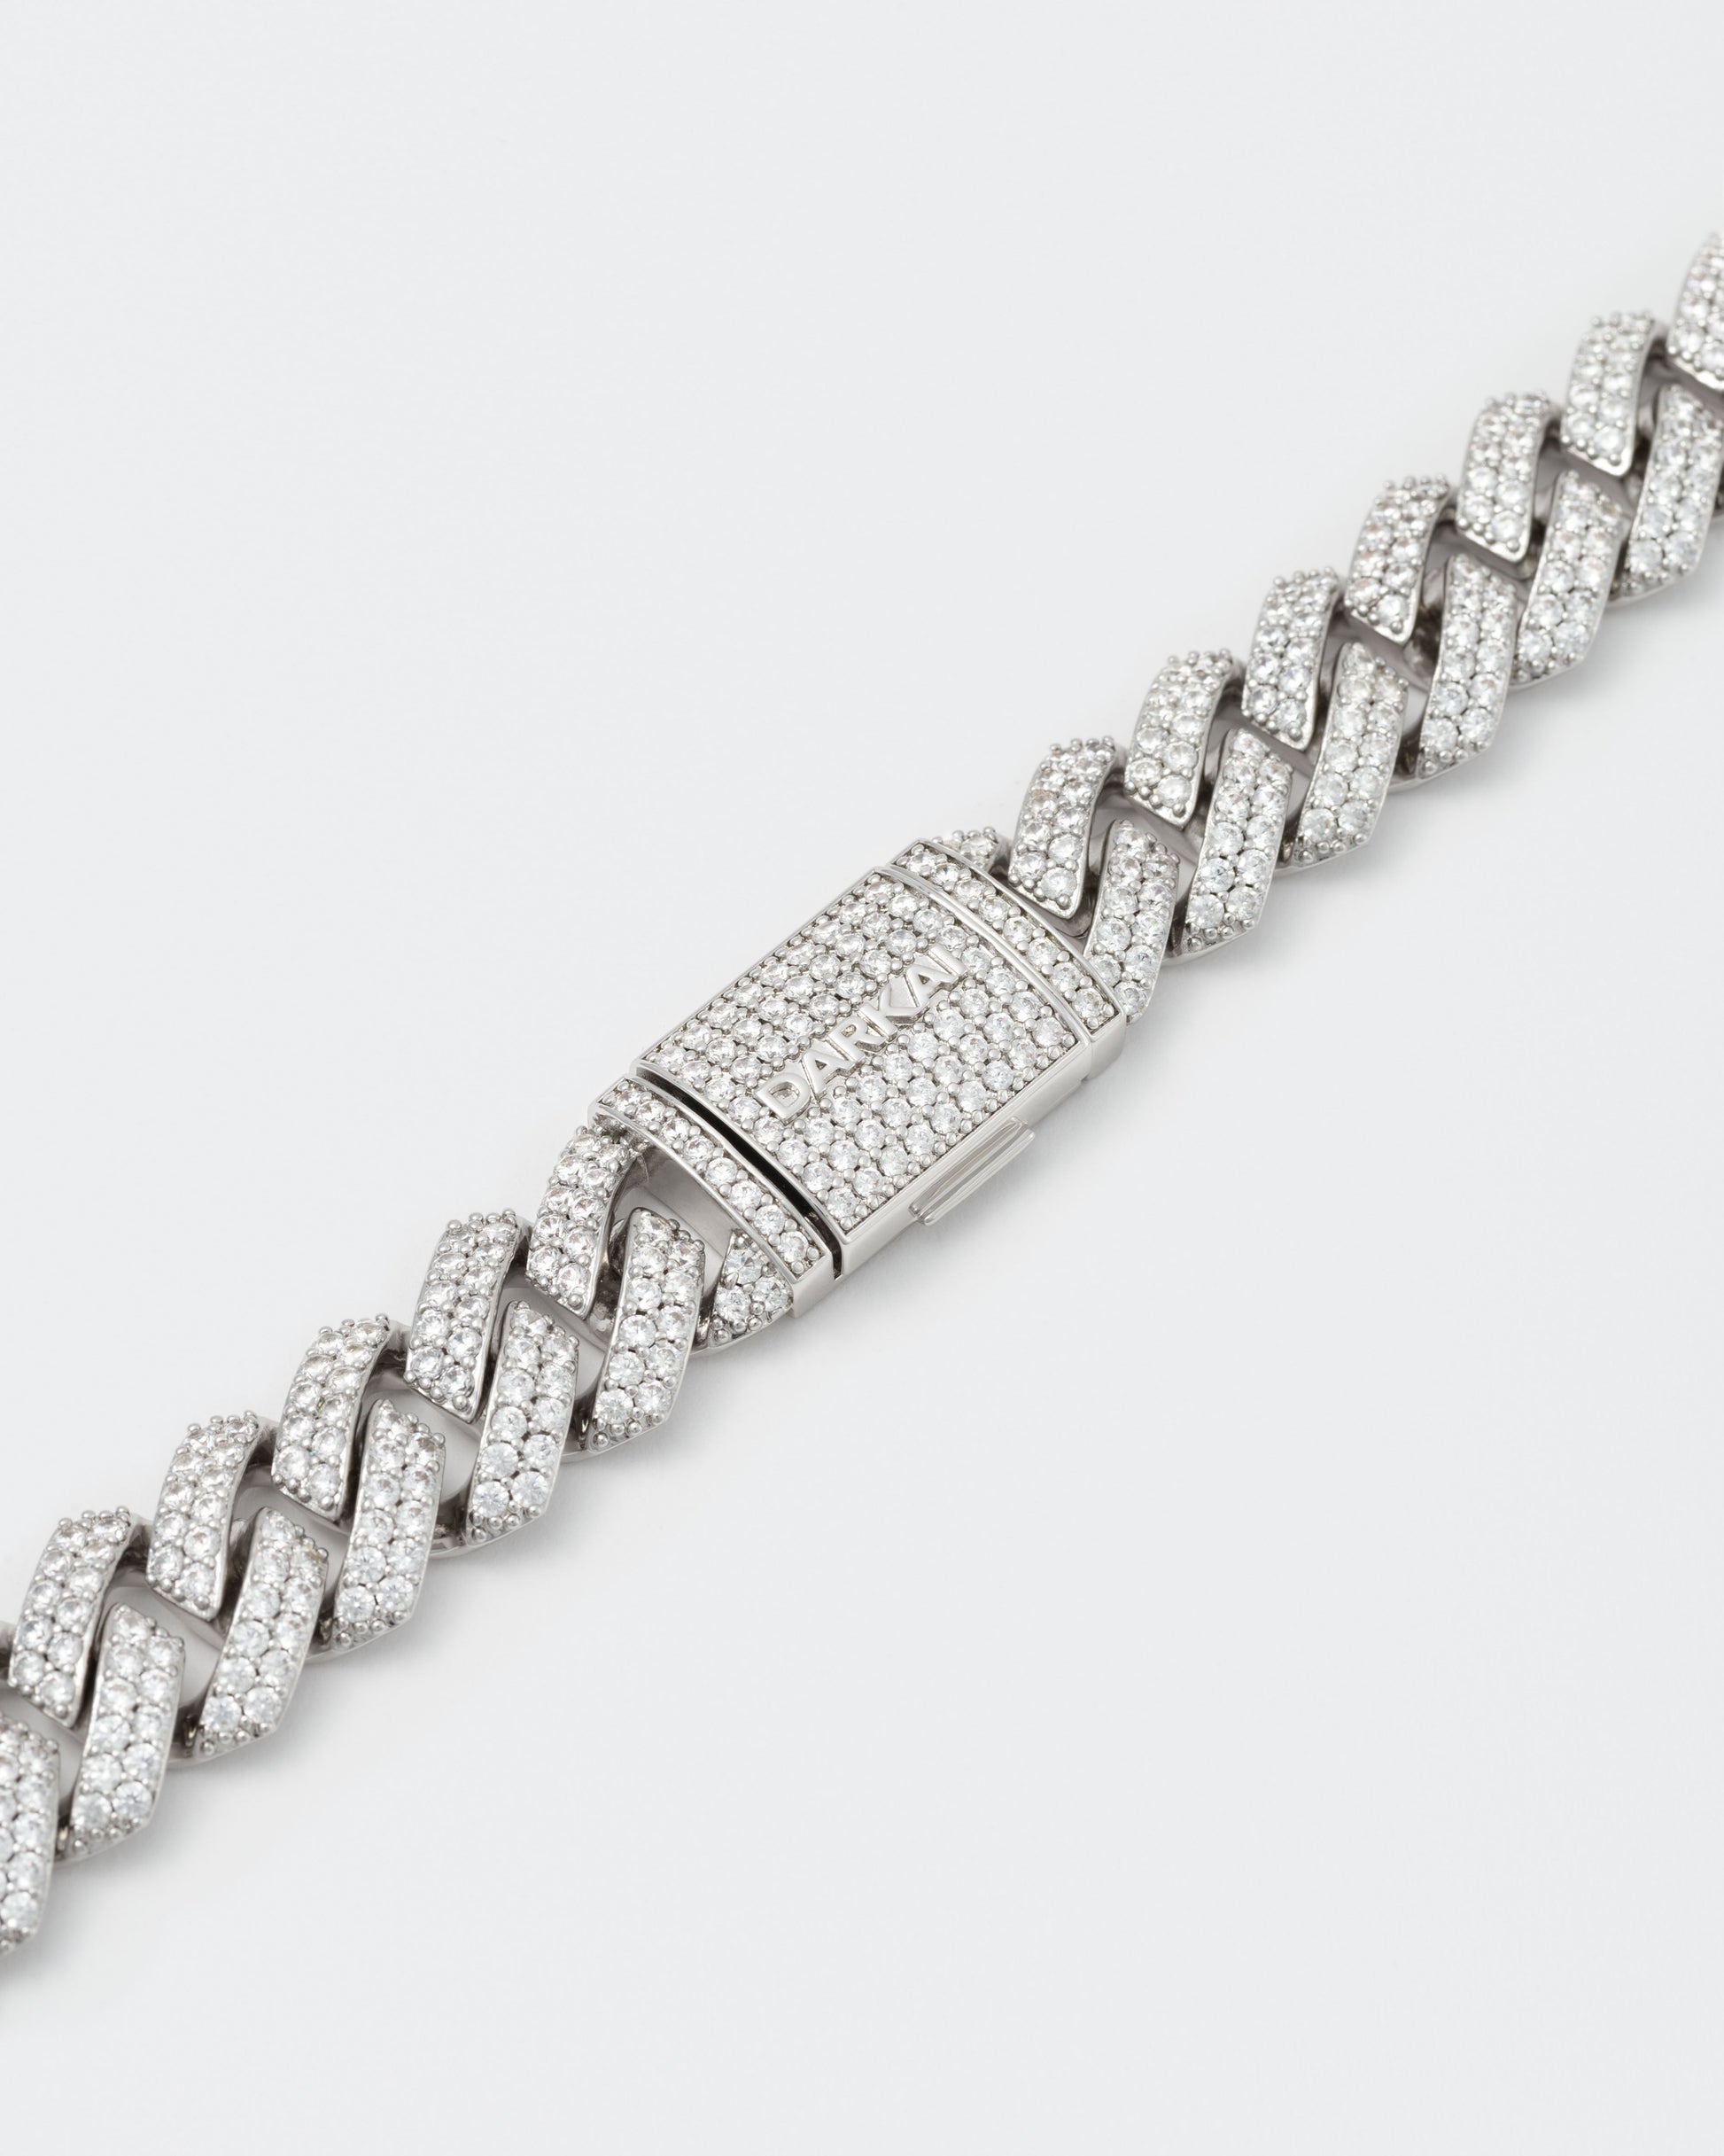 detail of clasp of 18k white gold coated prong chain necklace with hand-set micropavé stones in white